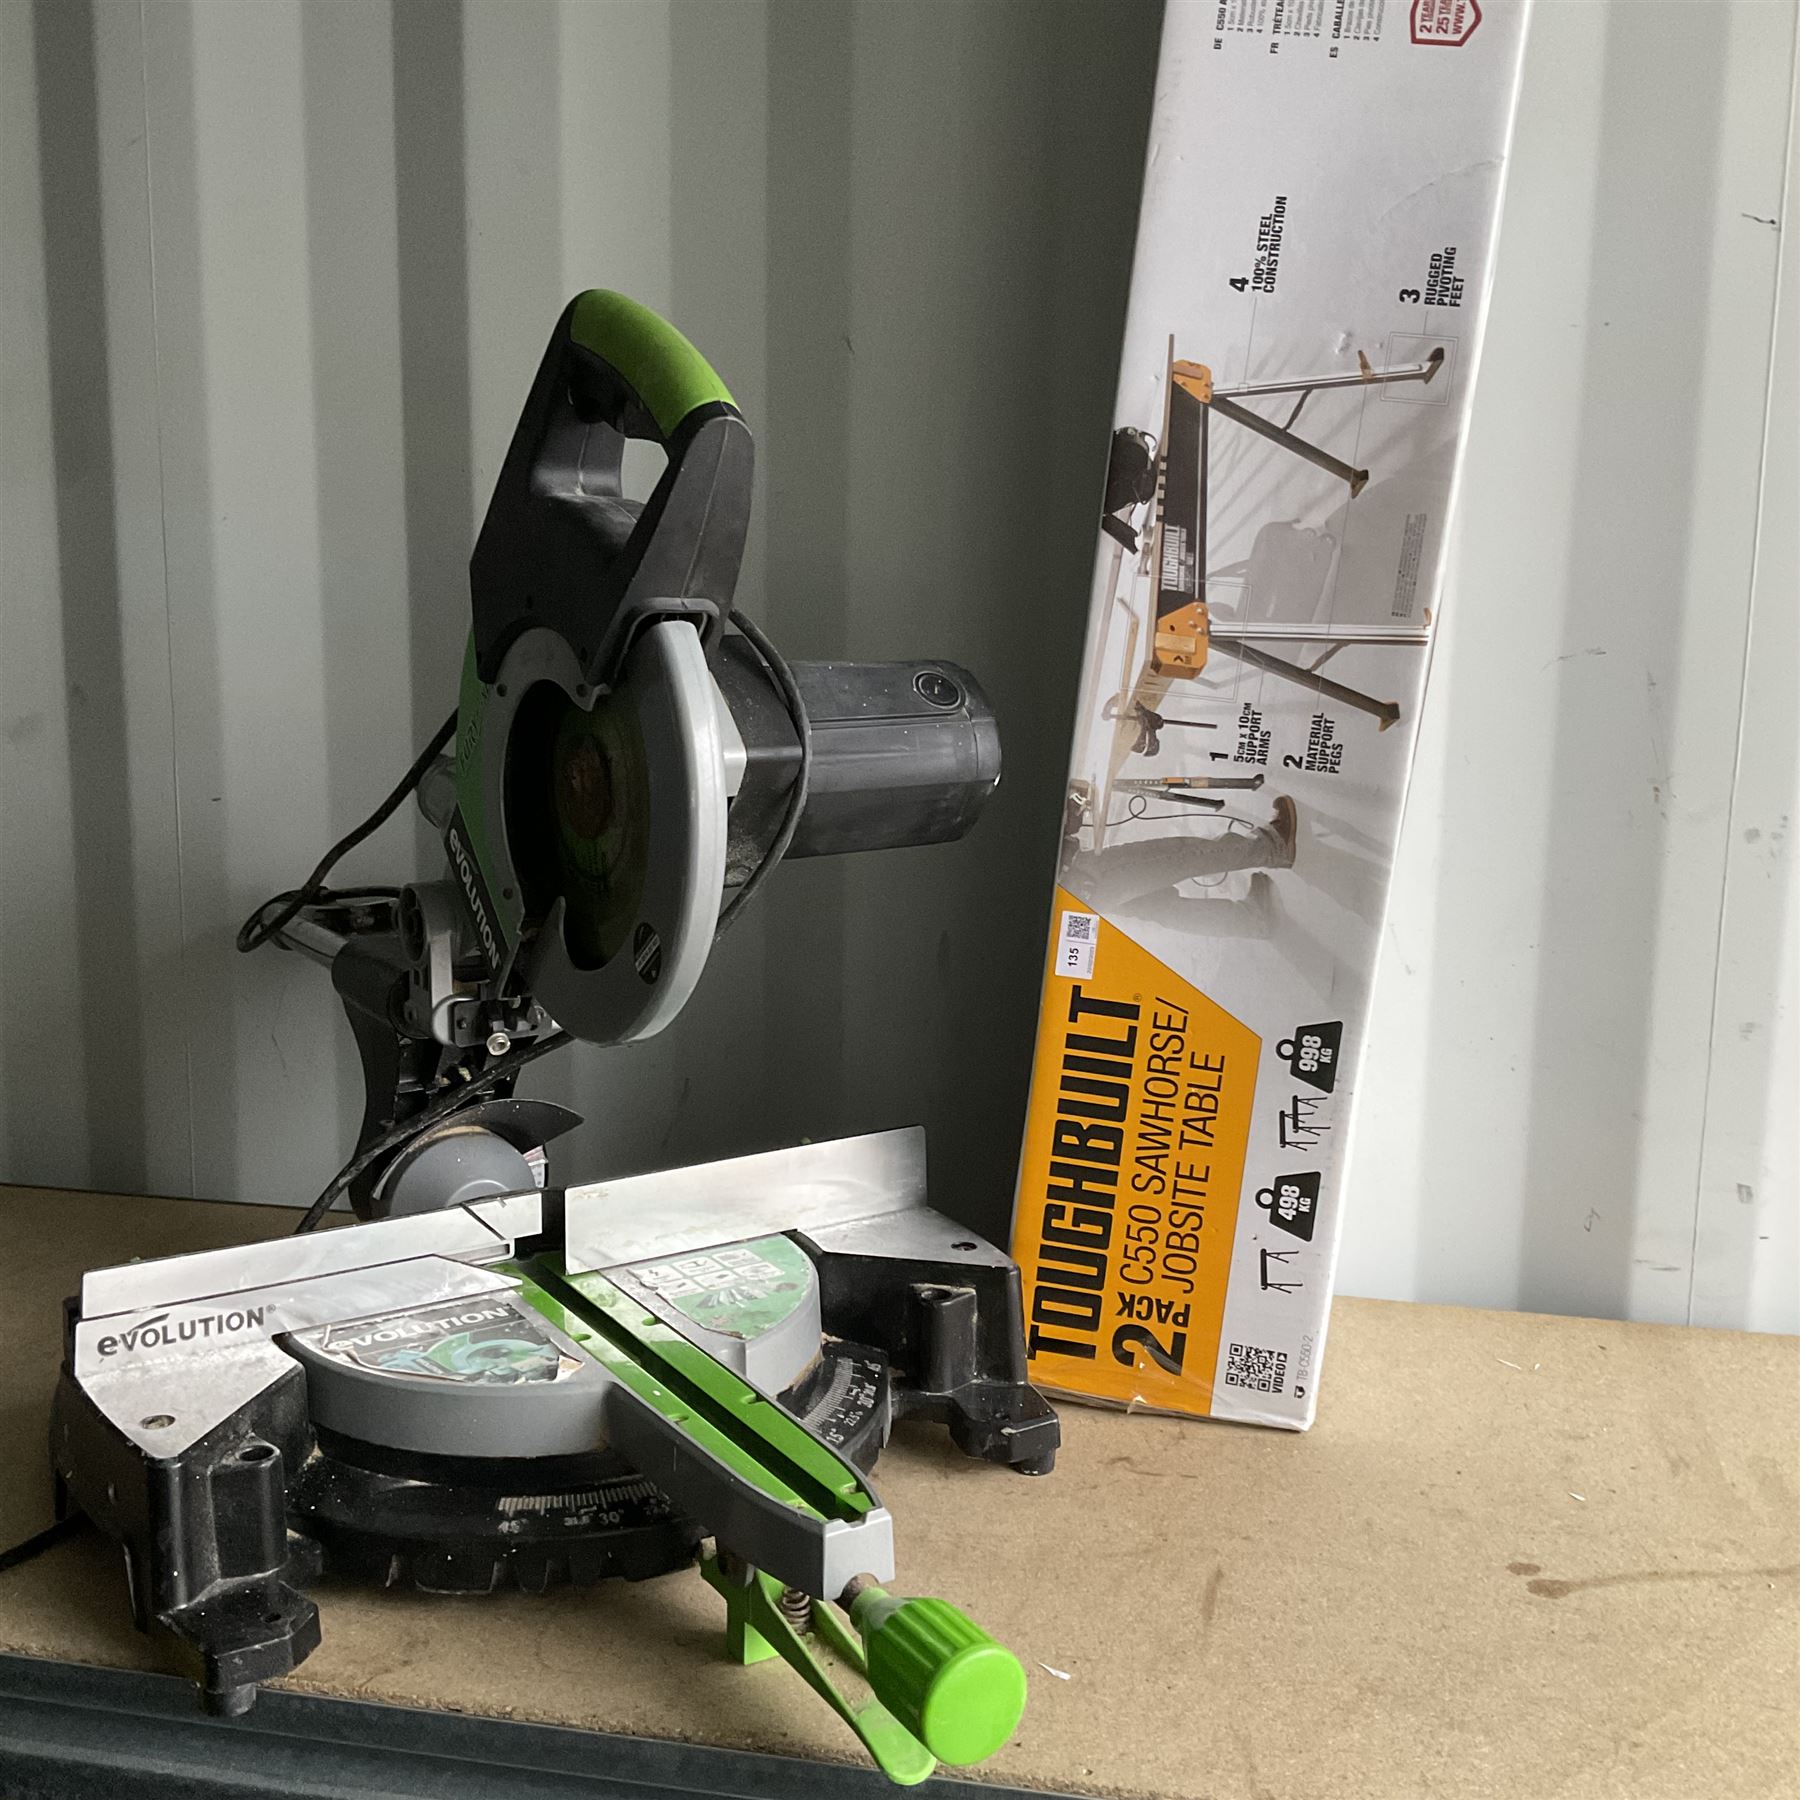 Evolution Fury3-XL Chop saw and Toughbuilt two pack C550 Sawhorse job site table (unopened)